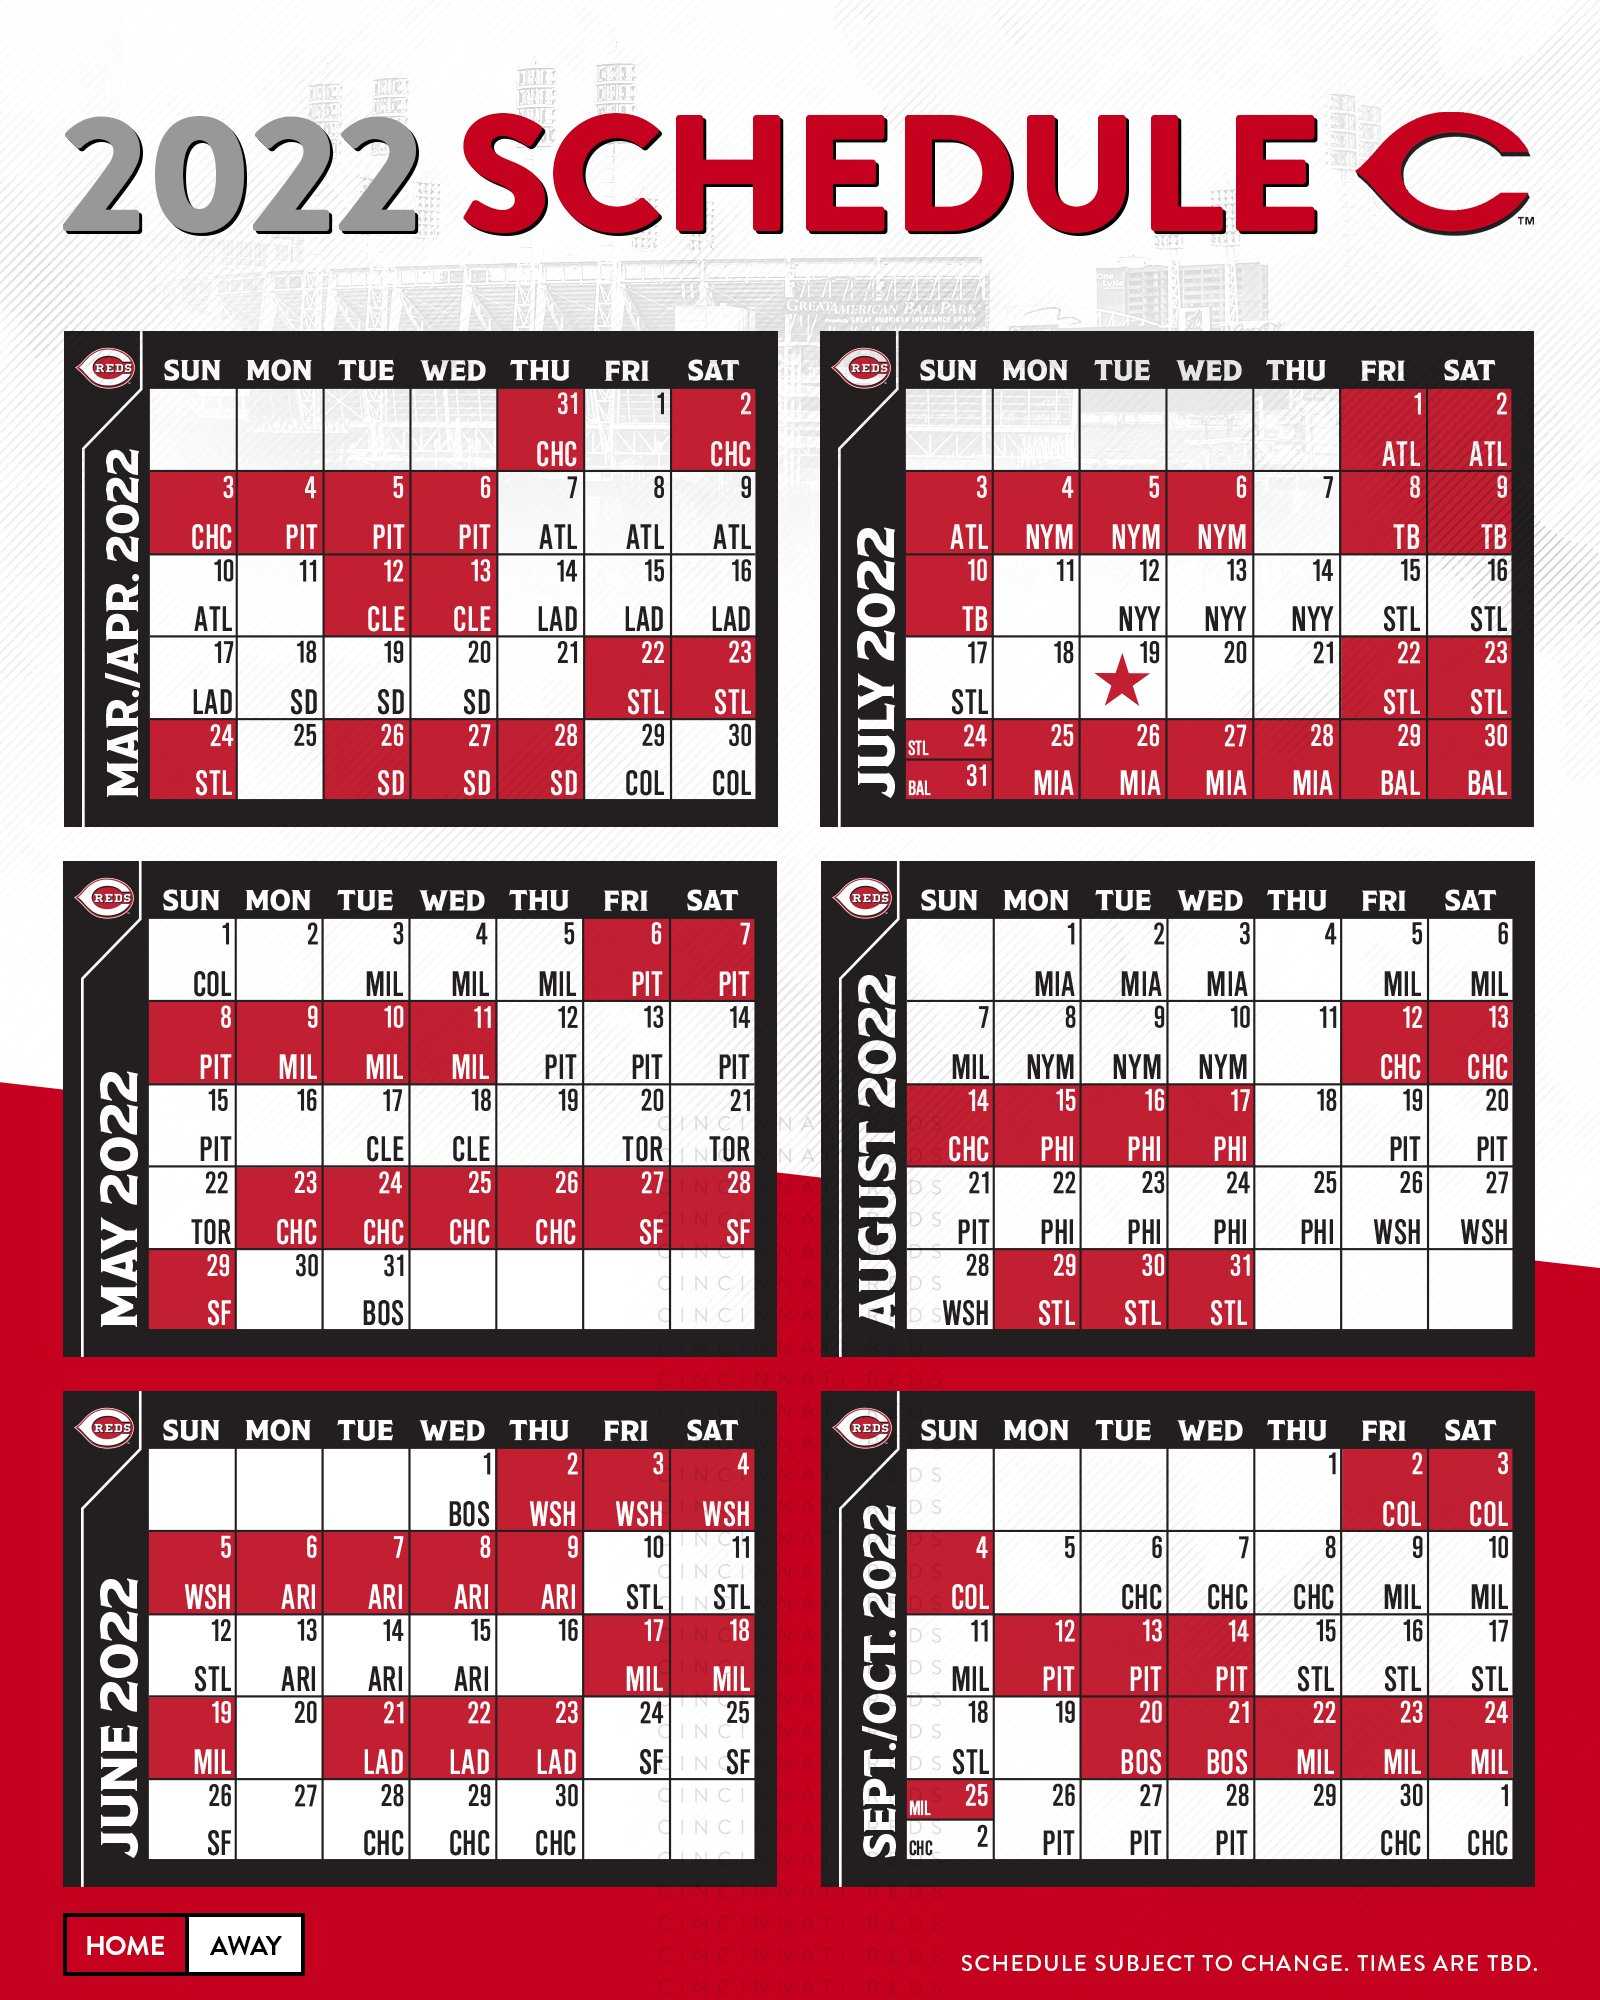 Chicago Cubs Calendar 2022 Cincinnati Reds Release 2022 Schedule: Here Are The Highlights